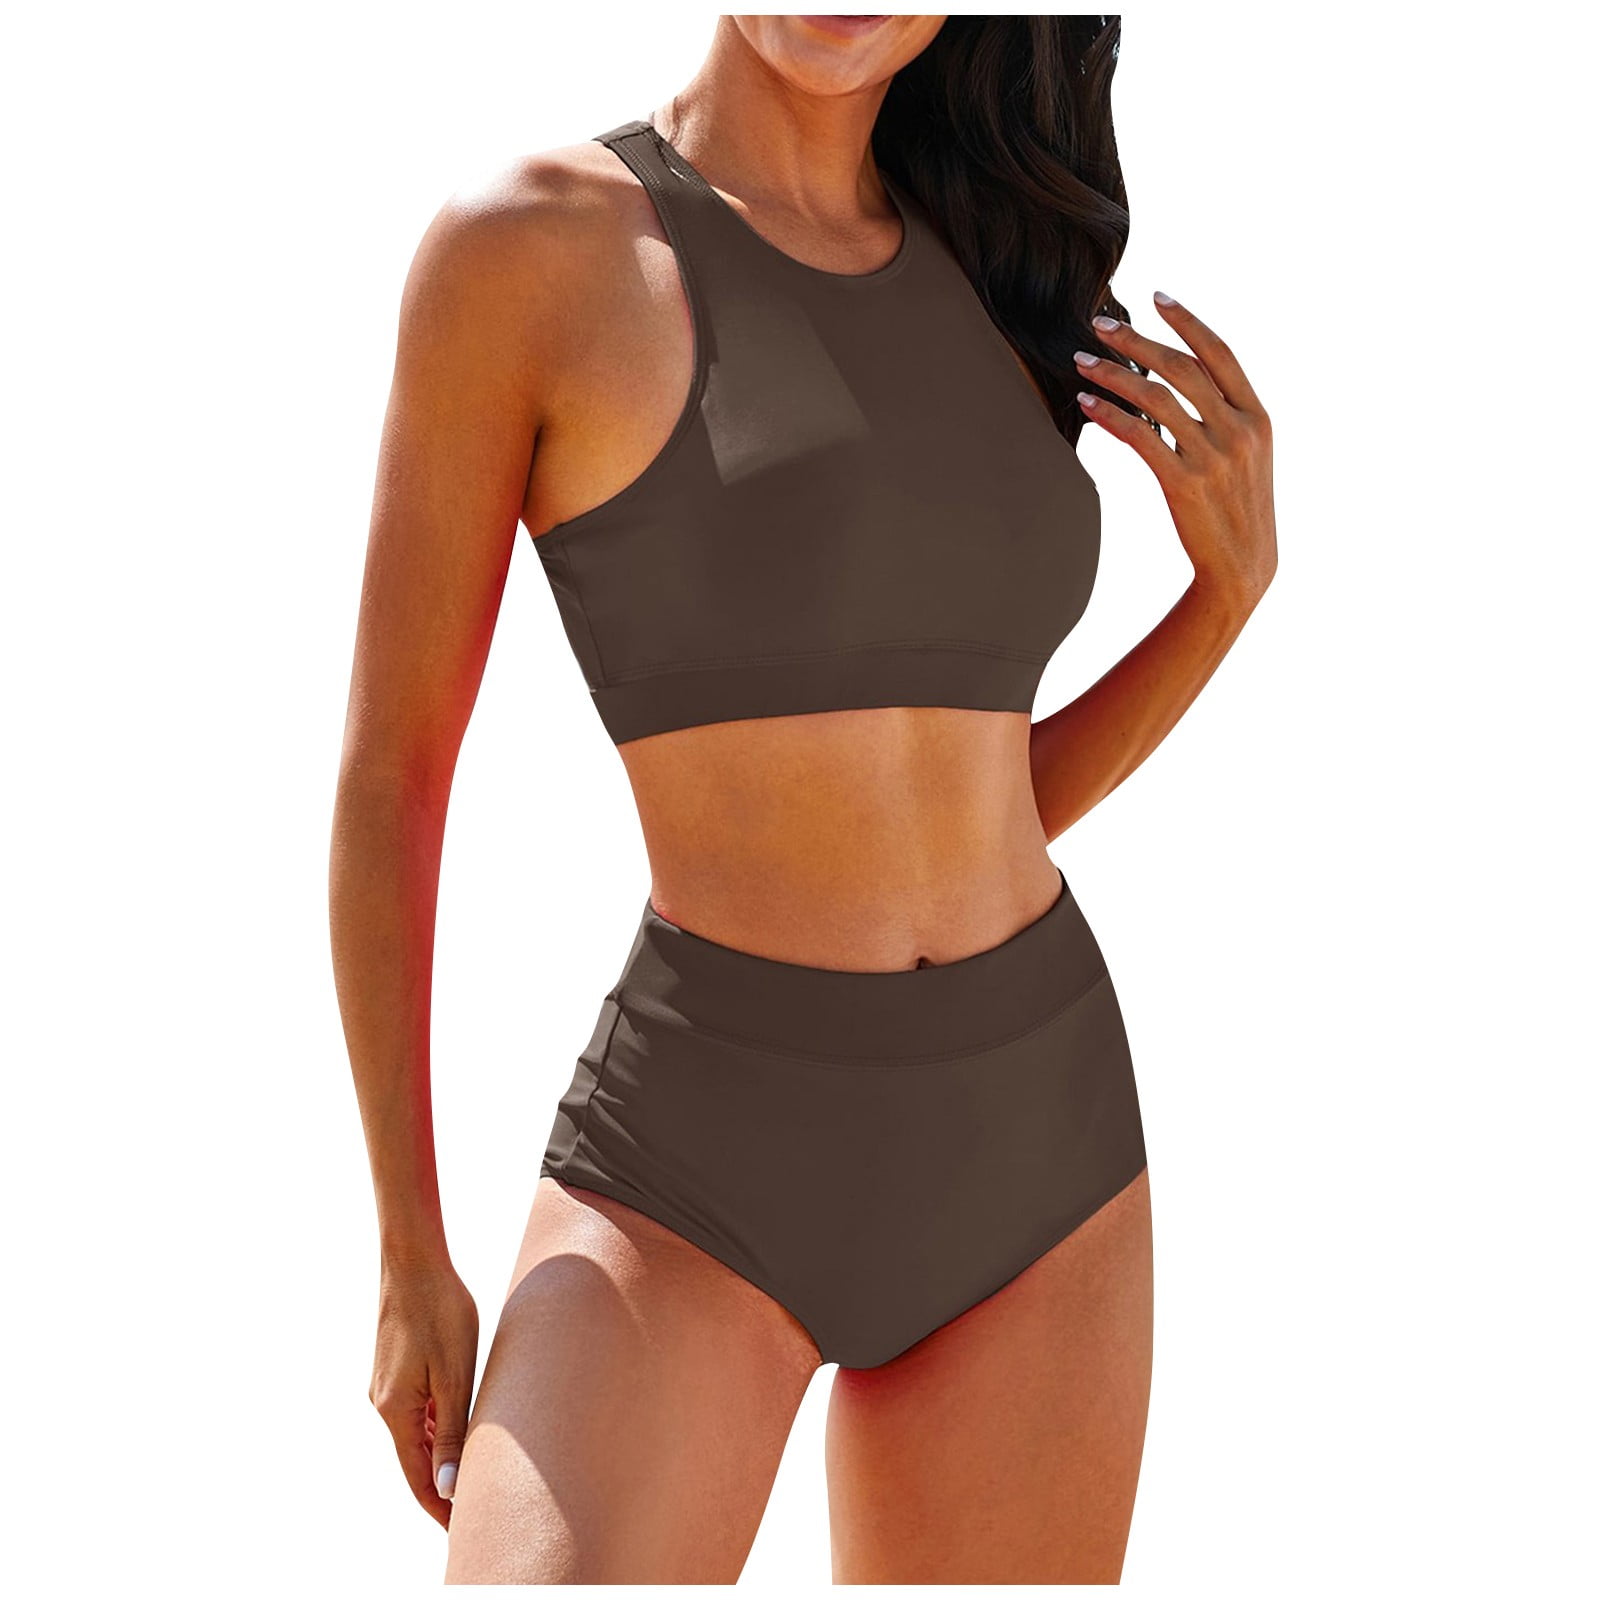 BIZIZA 2 Piece Bathing Suit with Built In Bra Workout Tank Top